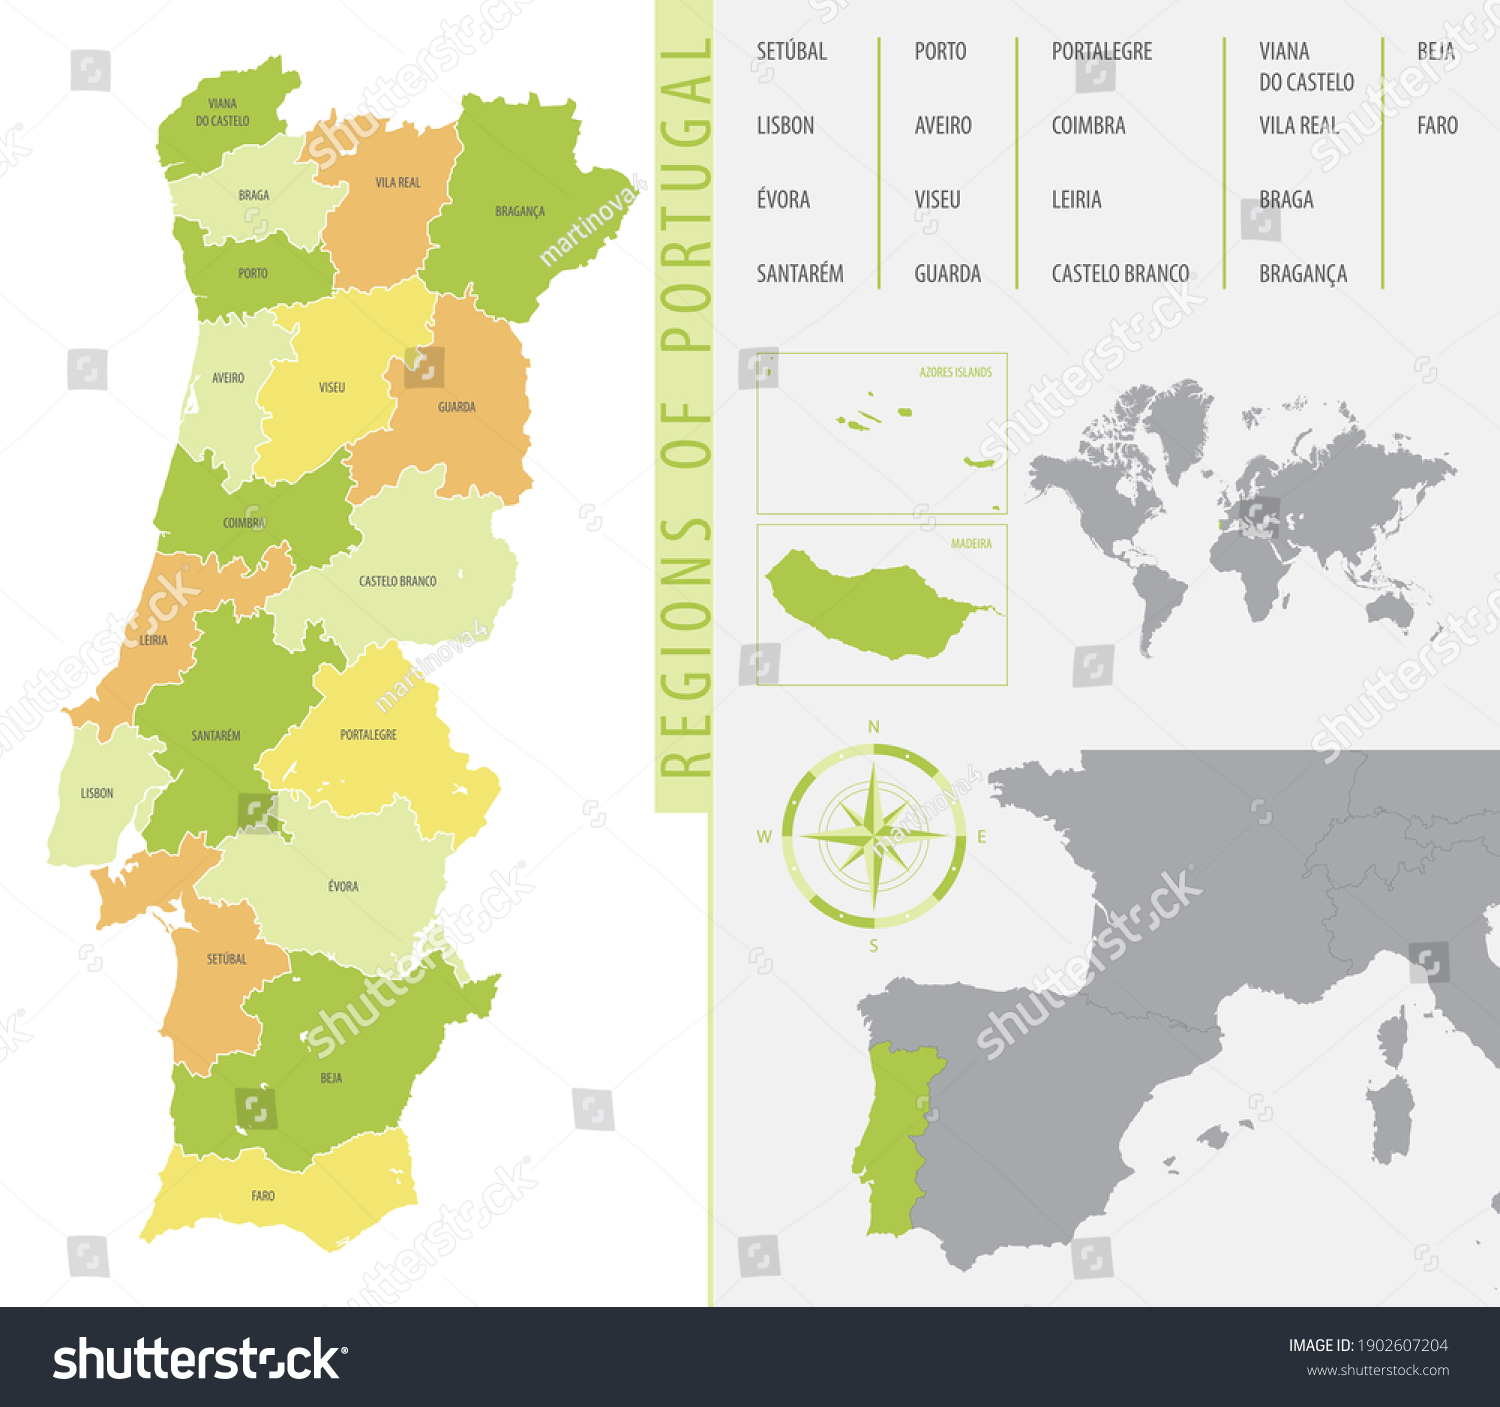 Detailed Administrative Divisions Map Portugal Showing Stock Vector Royalty Free 1902607204 3078